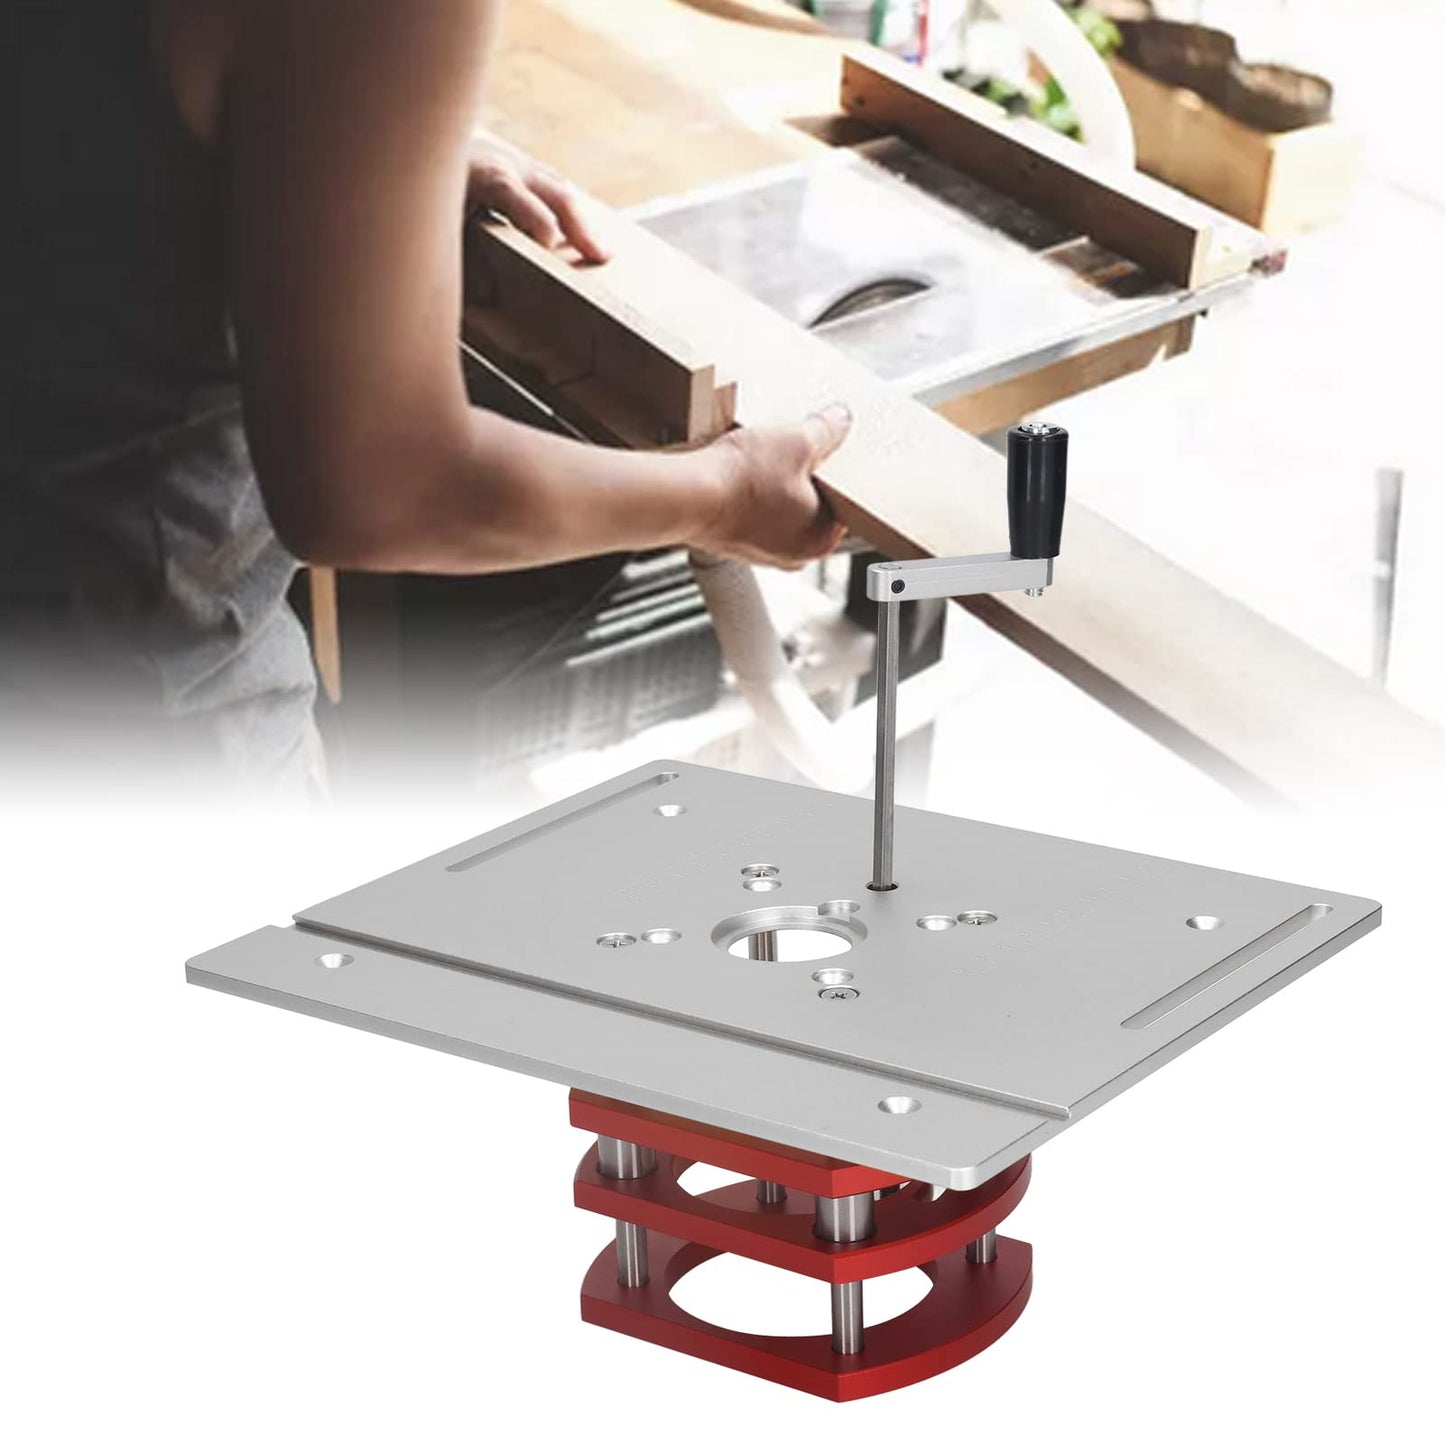 Router Lift, Manual Lifting Router Lift System Kit Router Table Saw Insert Base Plate for Trimming Machines with Motor Diameter Between 64~66mm /